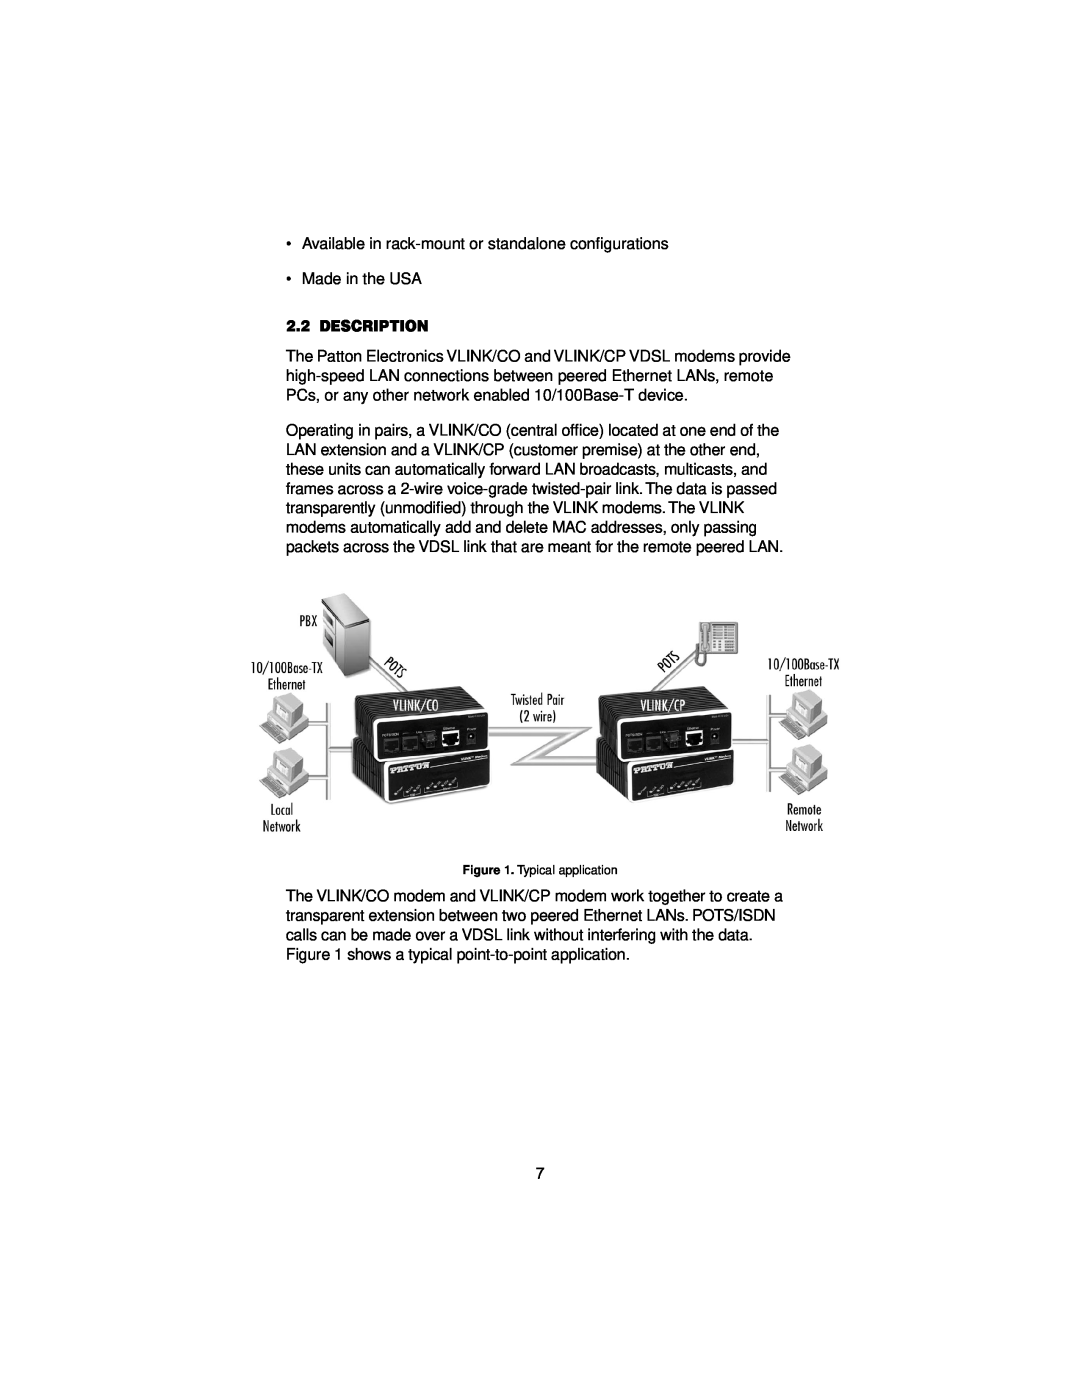 Patton electronic 1068 user manual Description, Available in rack-mount or standalone conﬁgurations Made in the USA 